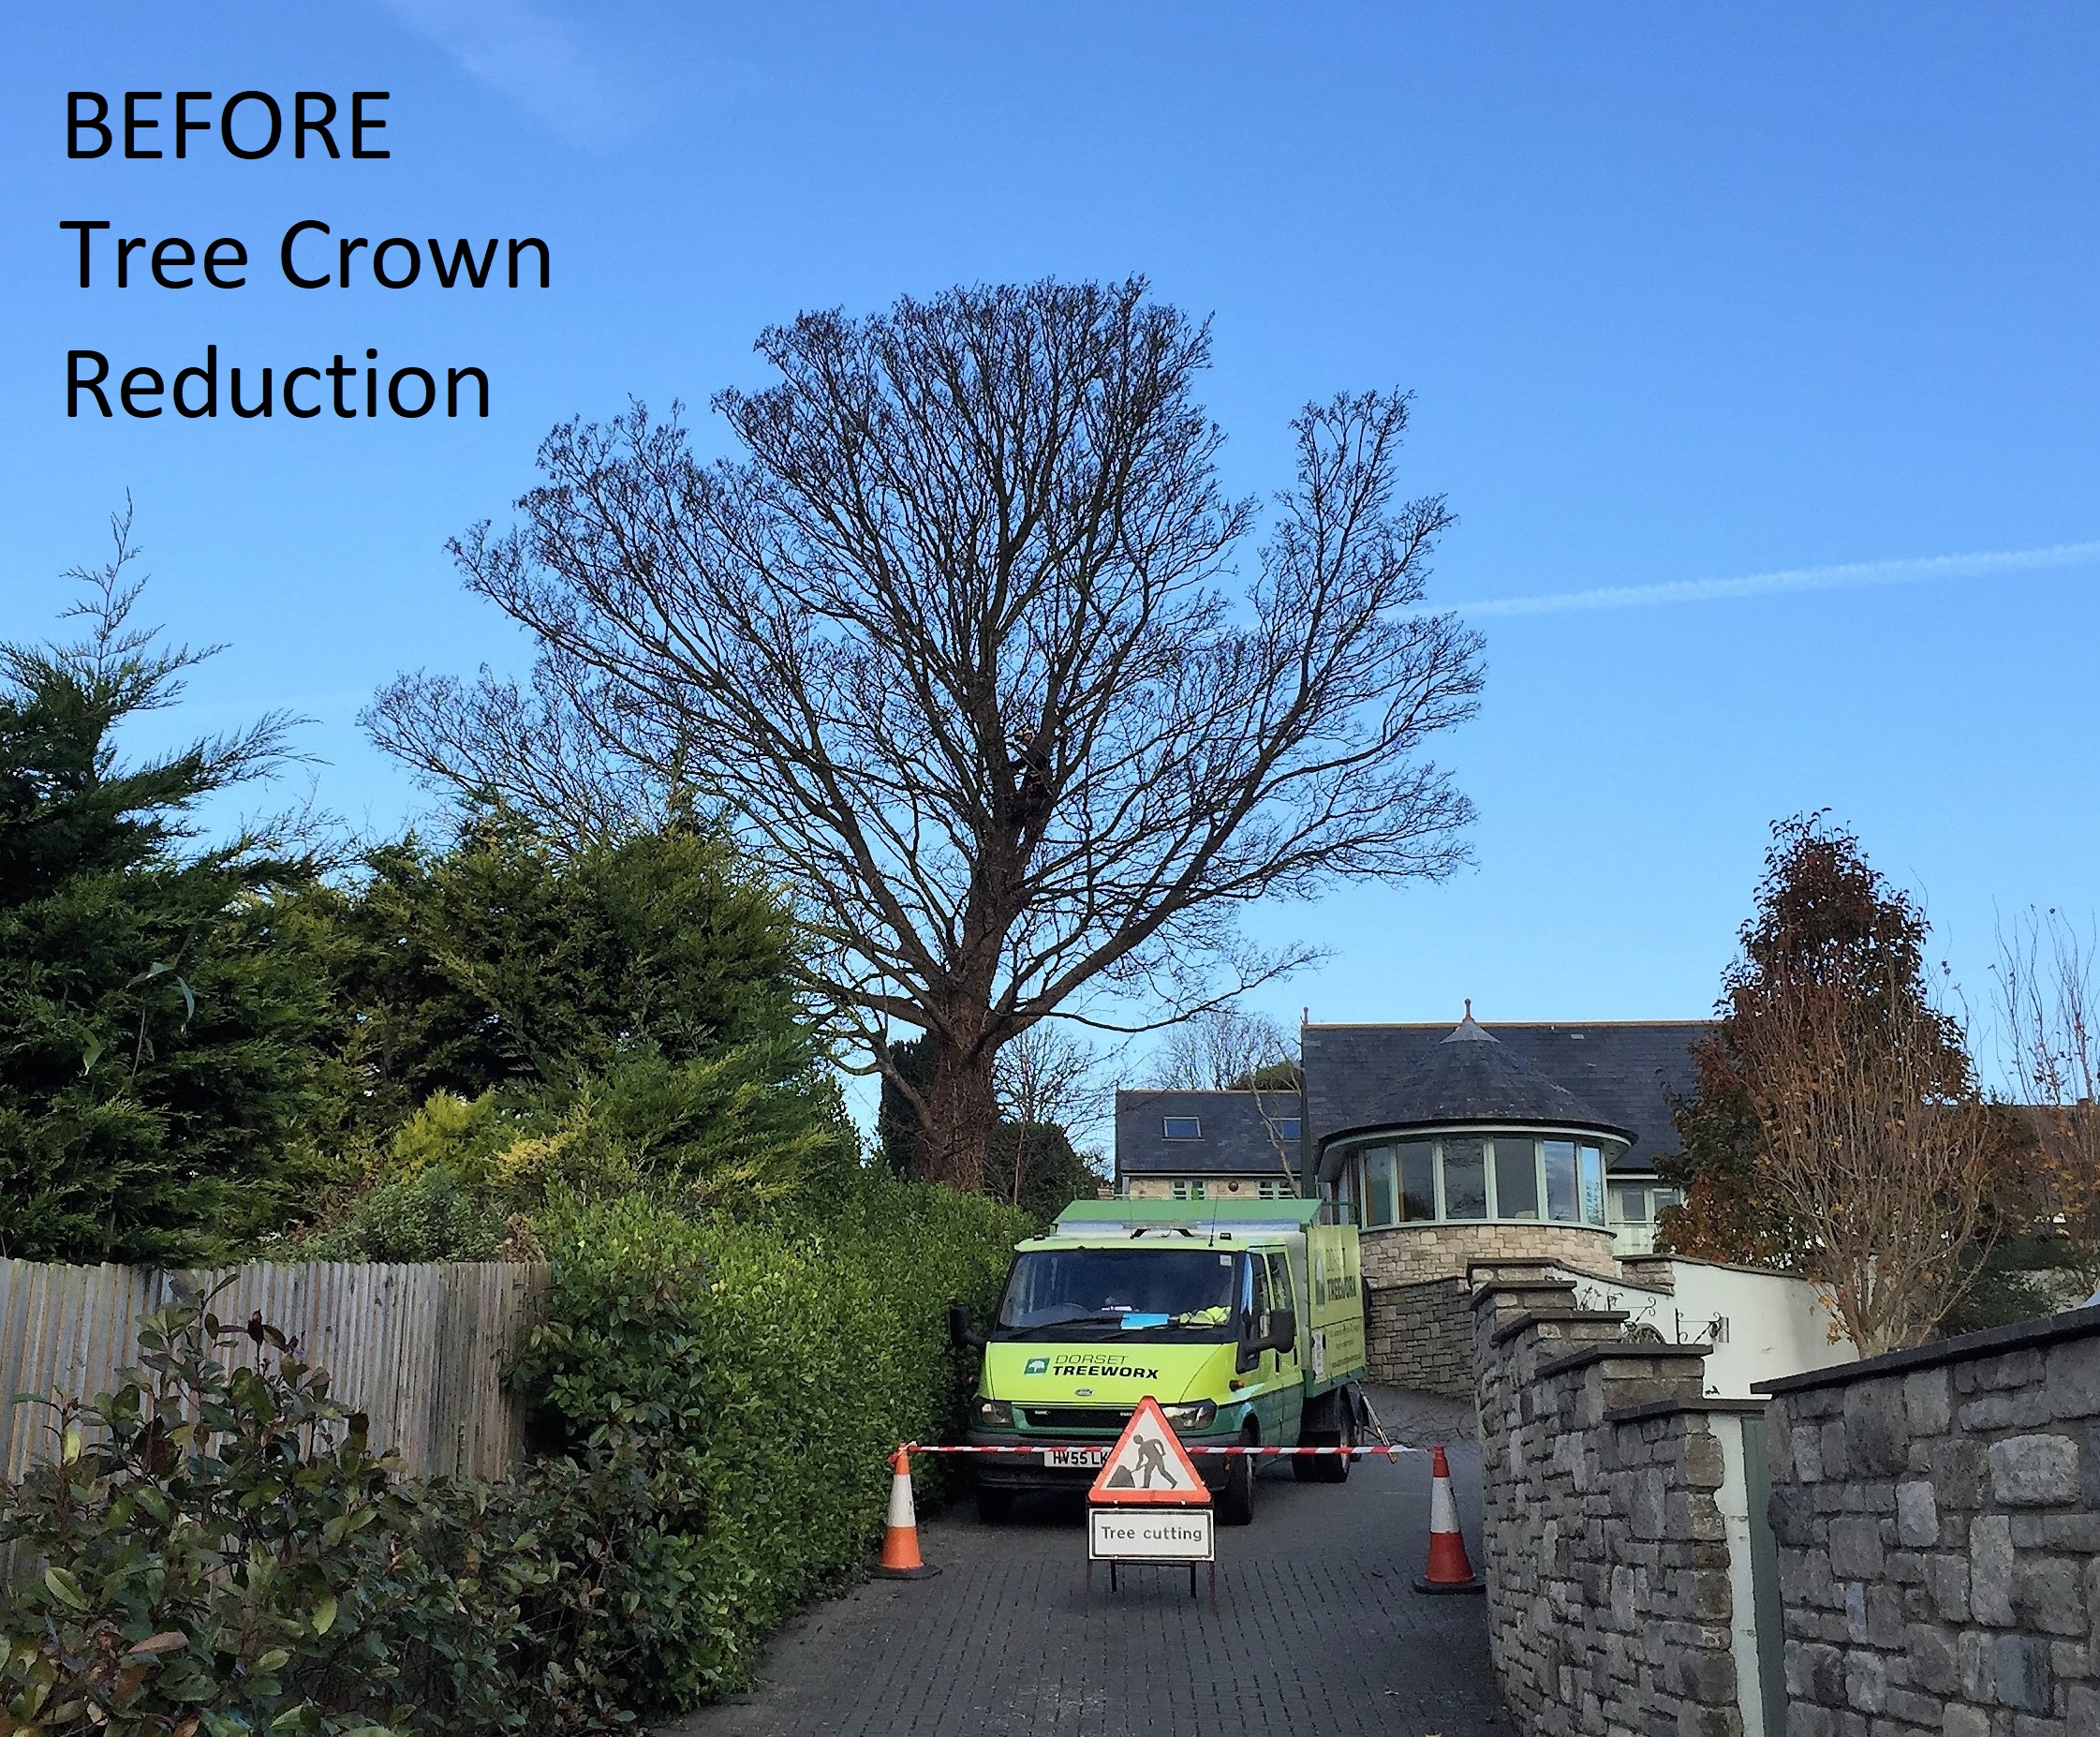 Tree Surgery & Hedge Trimming in Weymouth, Dorchester, Portland, UK